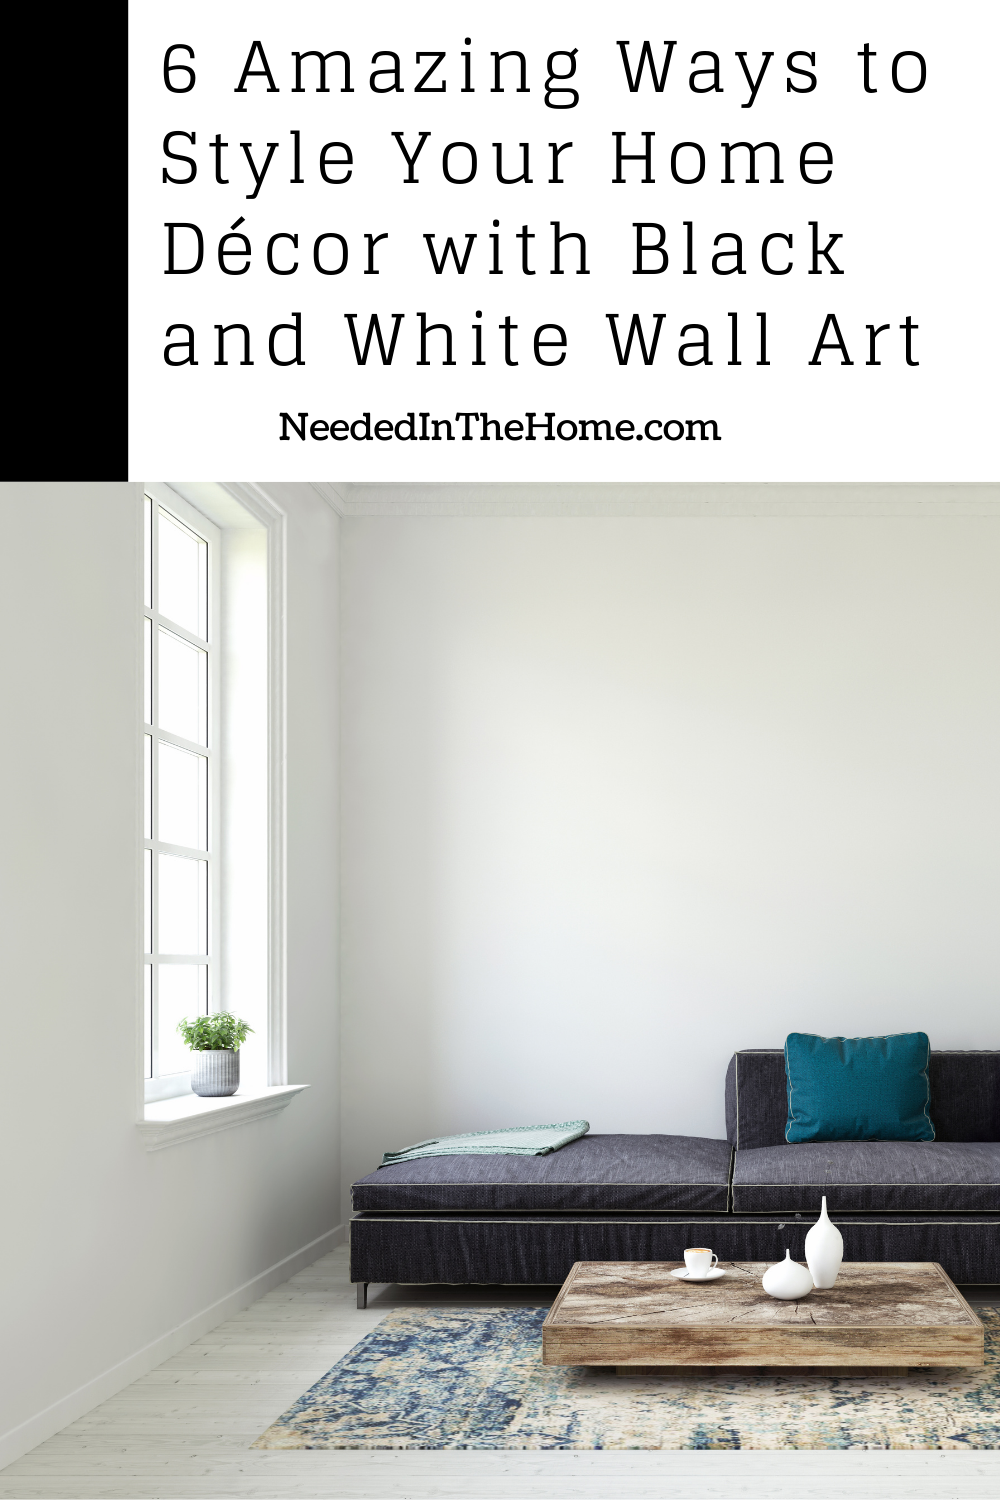 pinterest-pin-description 6 amazing ways to style your home decor with black and white wall art